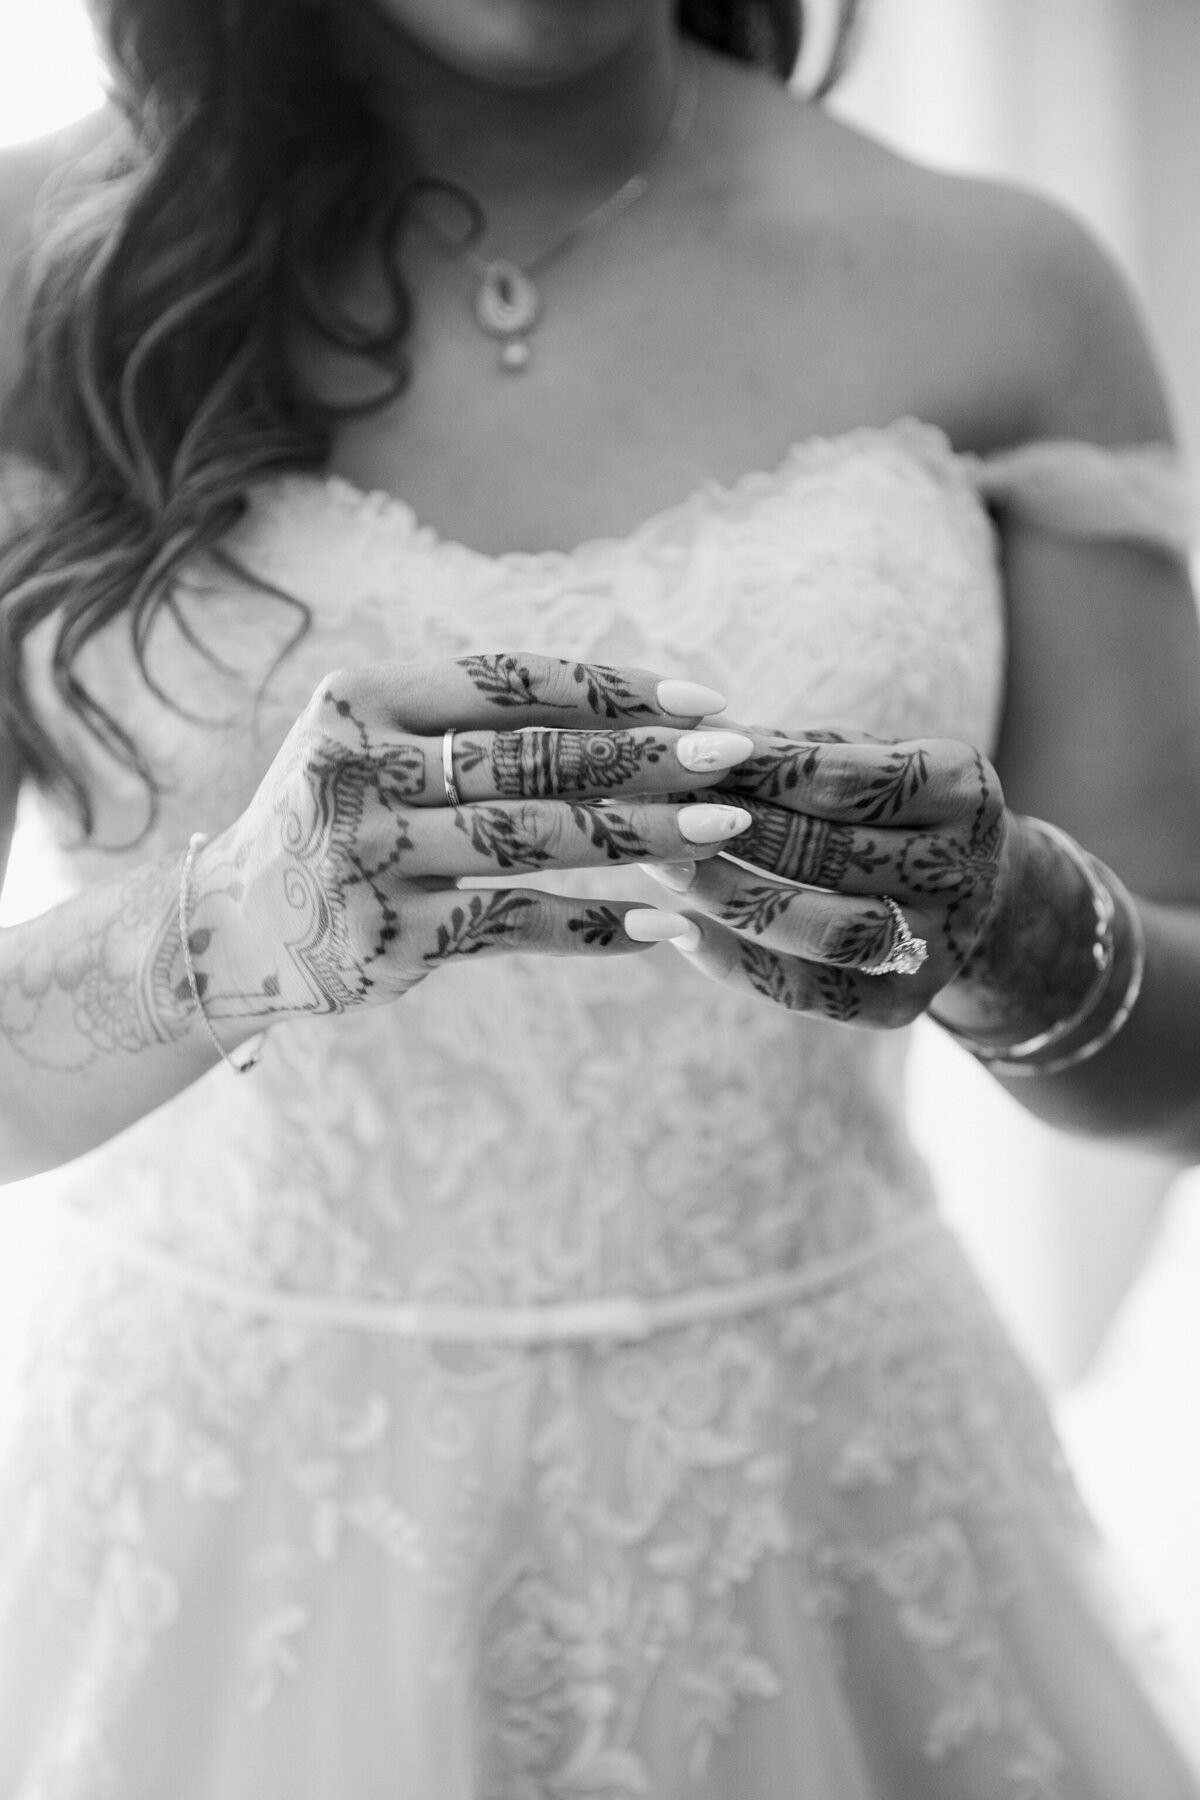 Portrait of a bride's hands on her wedding day in Dallas, Texas. Her hands are adorned with traditional patterns and artwork of her culture. Additionally, she is wearing an intricate, detailed, white dress, multiple bracelets, and a necklace.